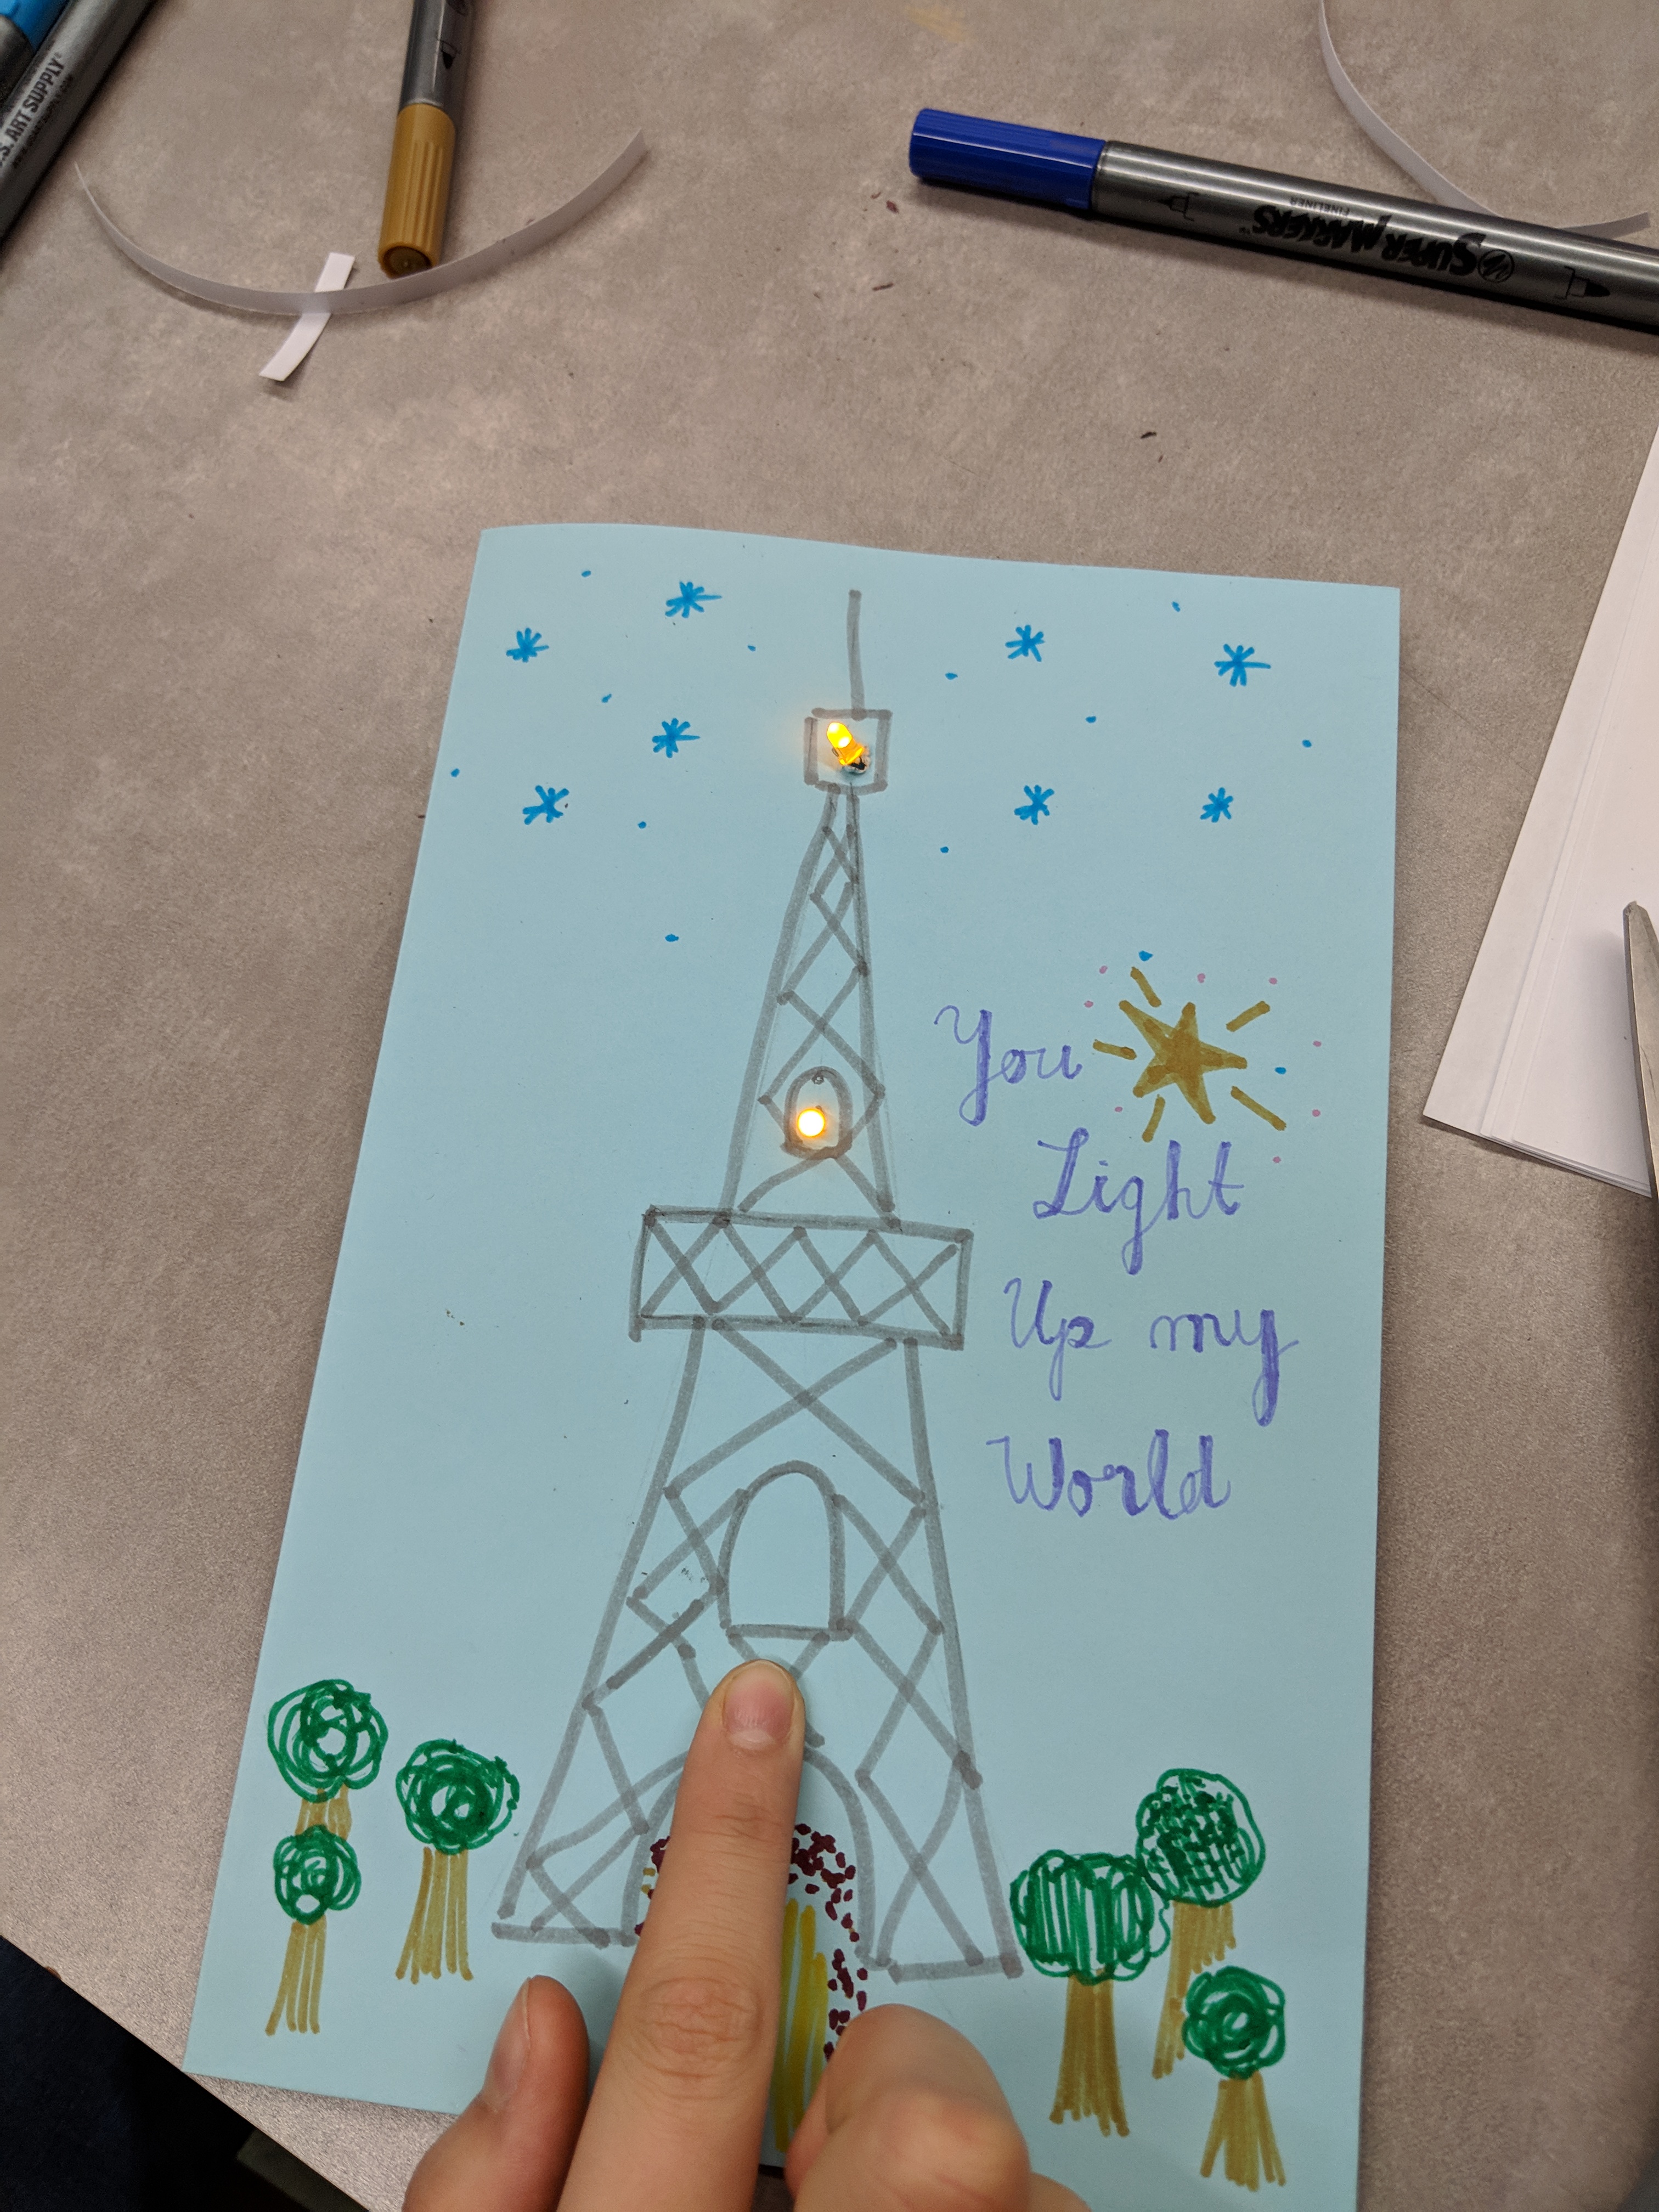 Sari on Science: Make your own LED light-up greeting card